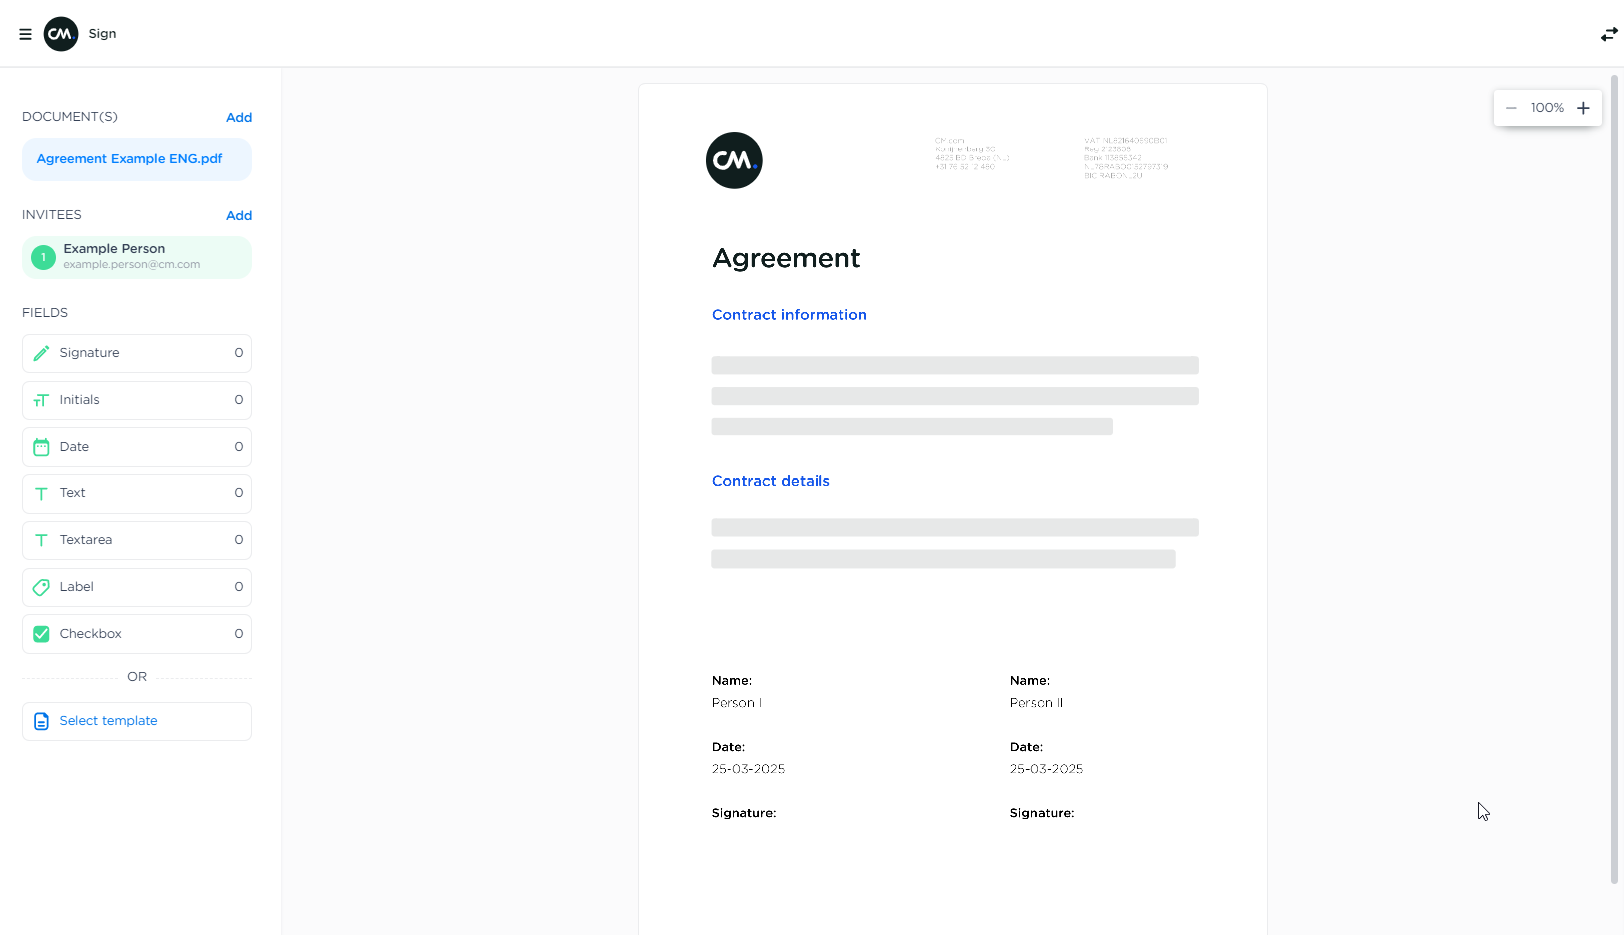 CM.com Sign – Interface for document upload and editing